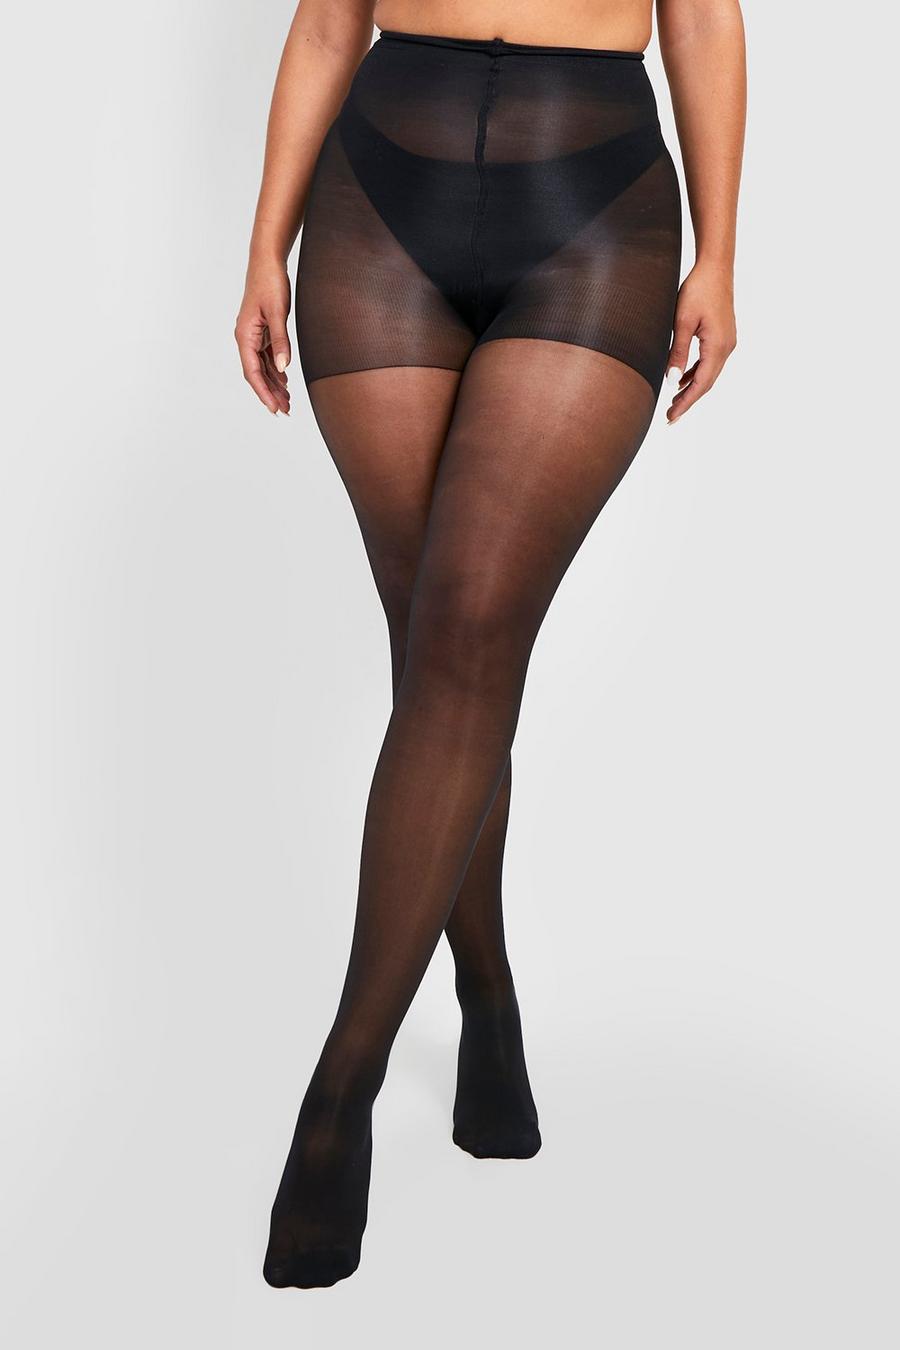 Tights Plus Size Black for Women, Soft and Durable Solid Pantyhose From XL  to 5XL -  Canada